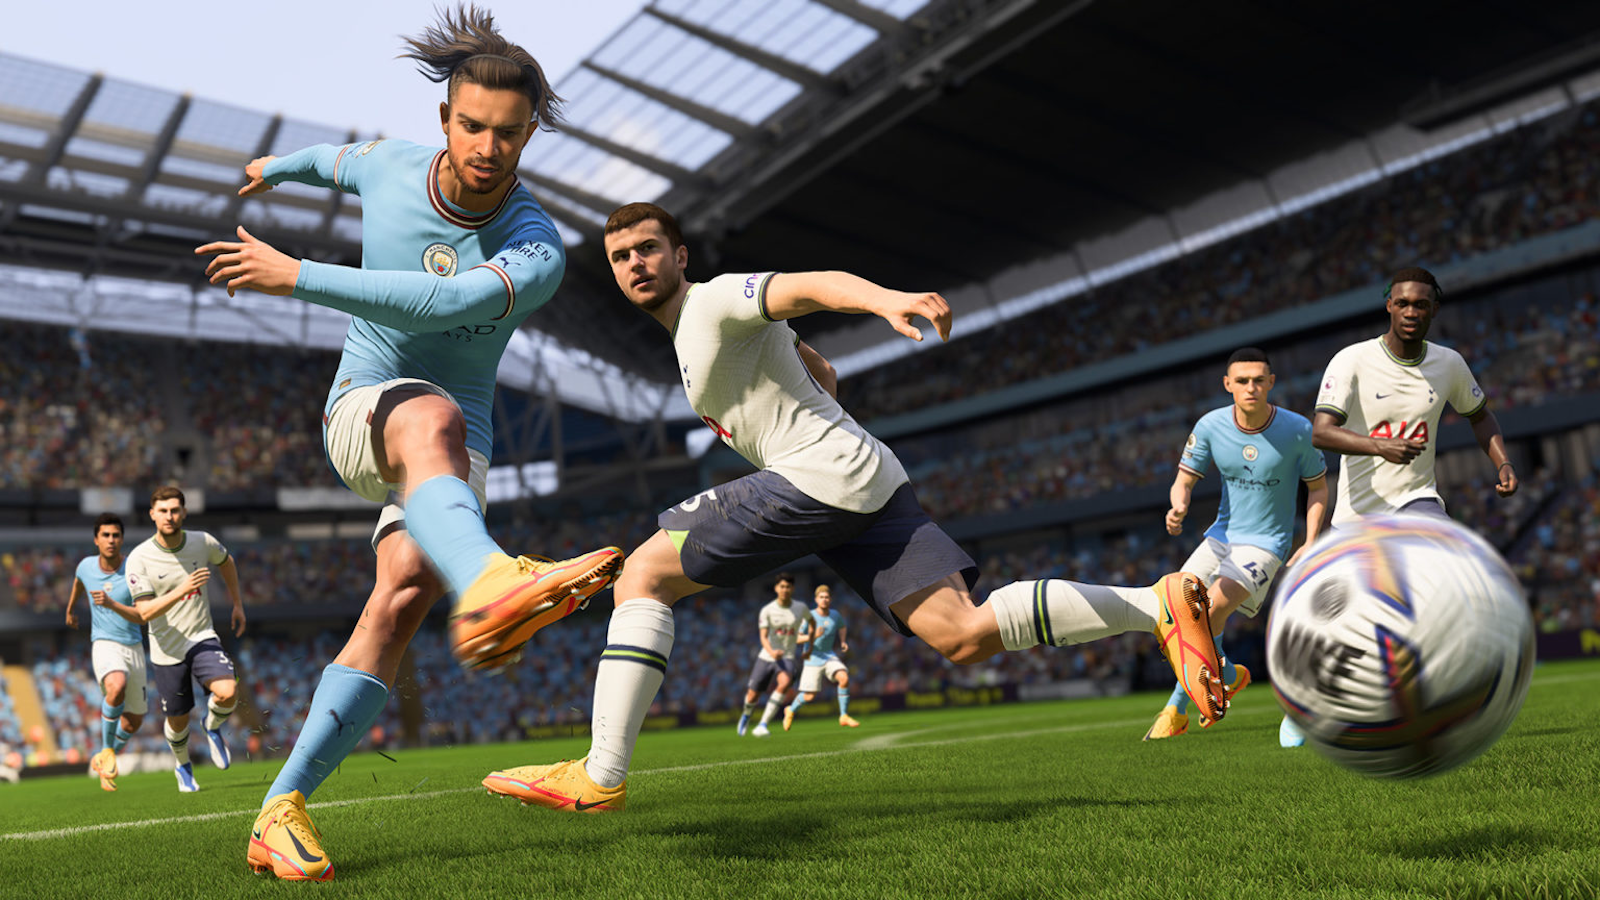 FIFA might team up with EA rival to develop new soccer sim juggernaut